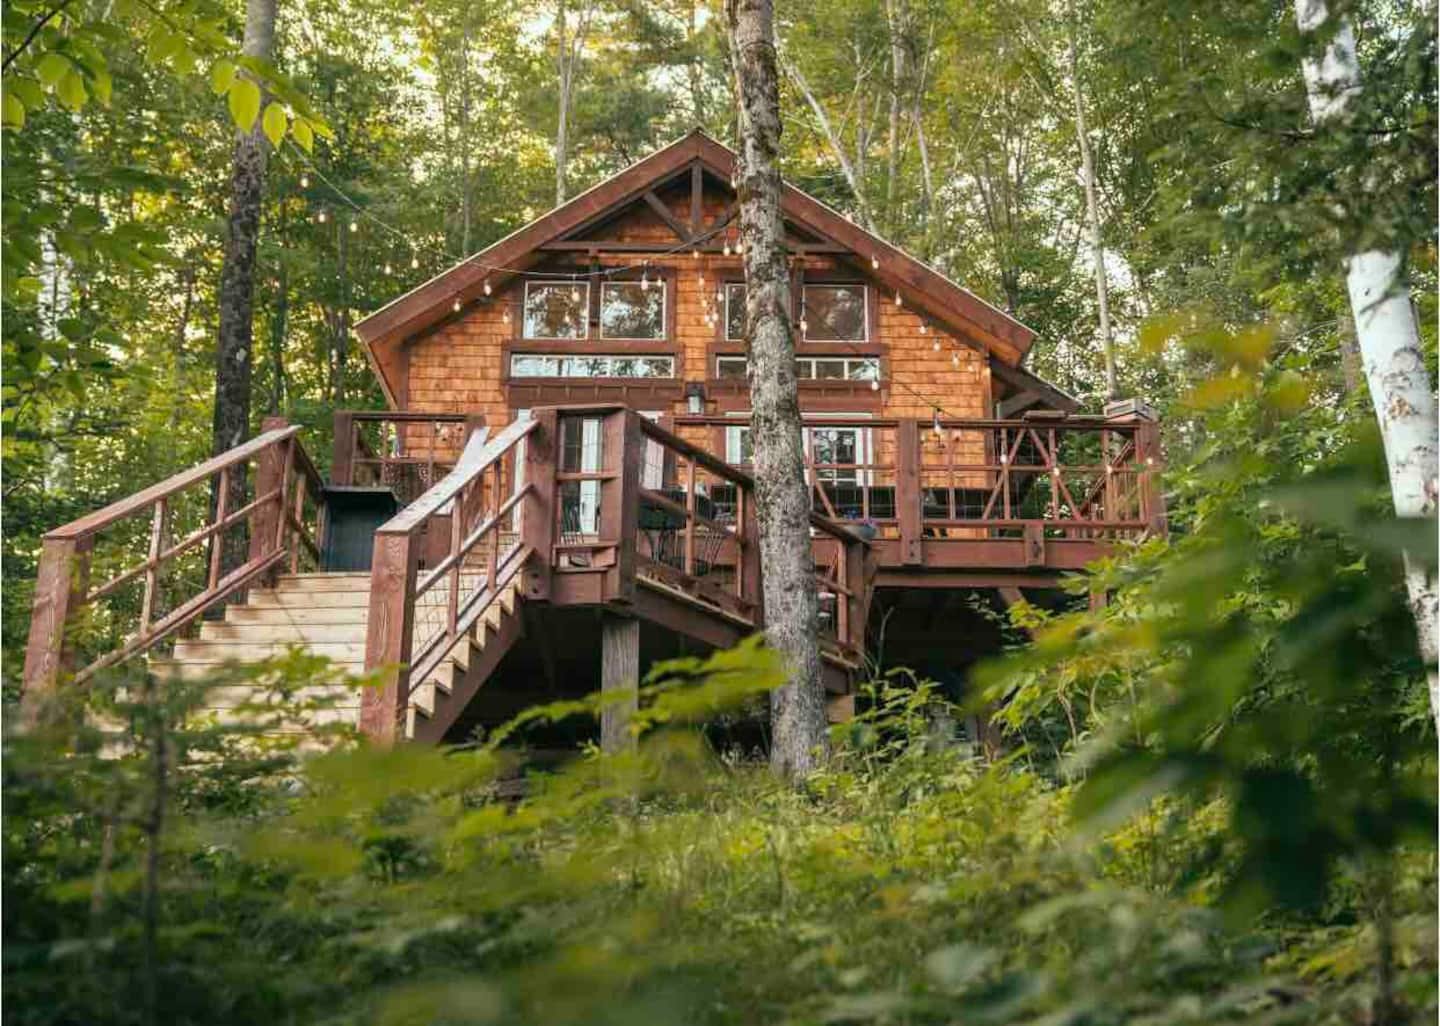  This upcycled,  one of a kind cottage  sits on the shore of Tully Pond with a breathtaking mountain view.    Typical starting price: $120    Location: Orange, Massachusetts     Sleeps: 6 guests    Rating: 4.96  